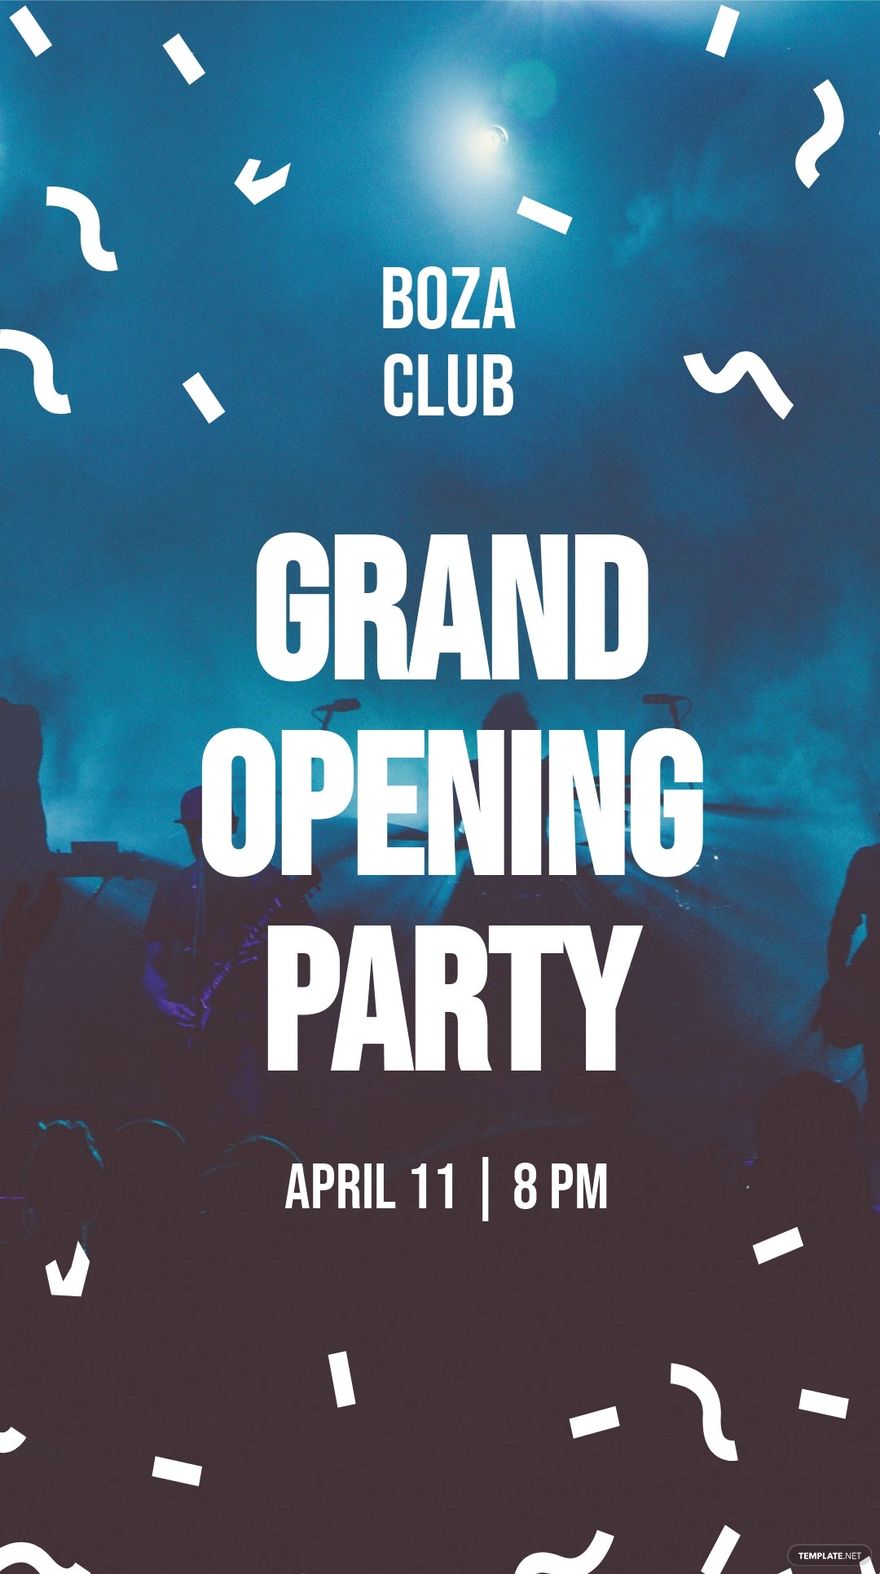 Grand Opening Party Whatsapp Post Template.jpe